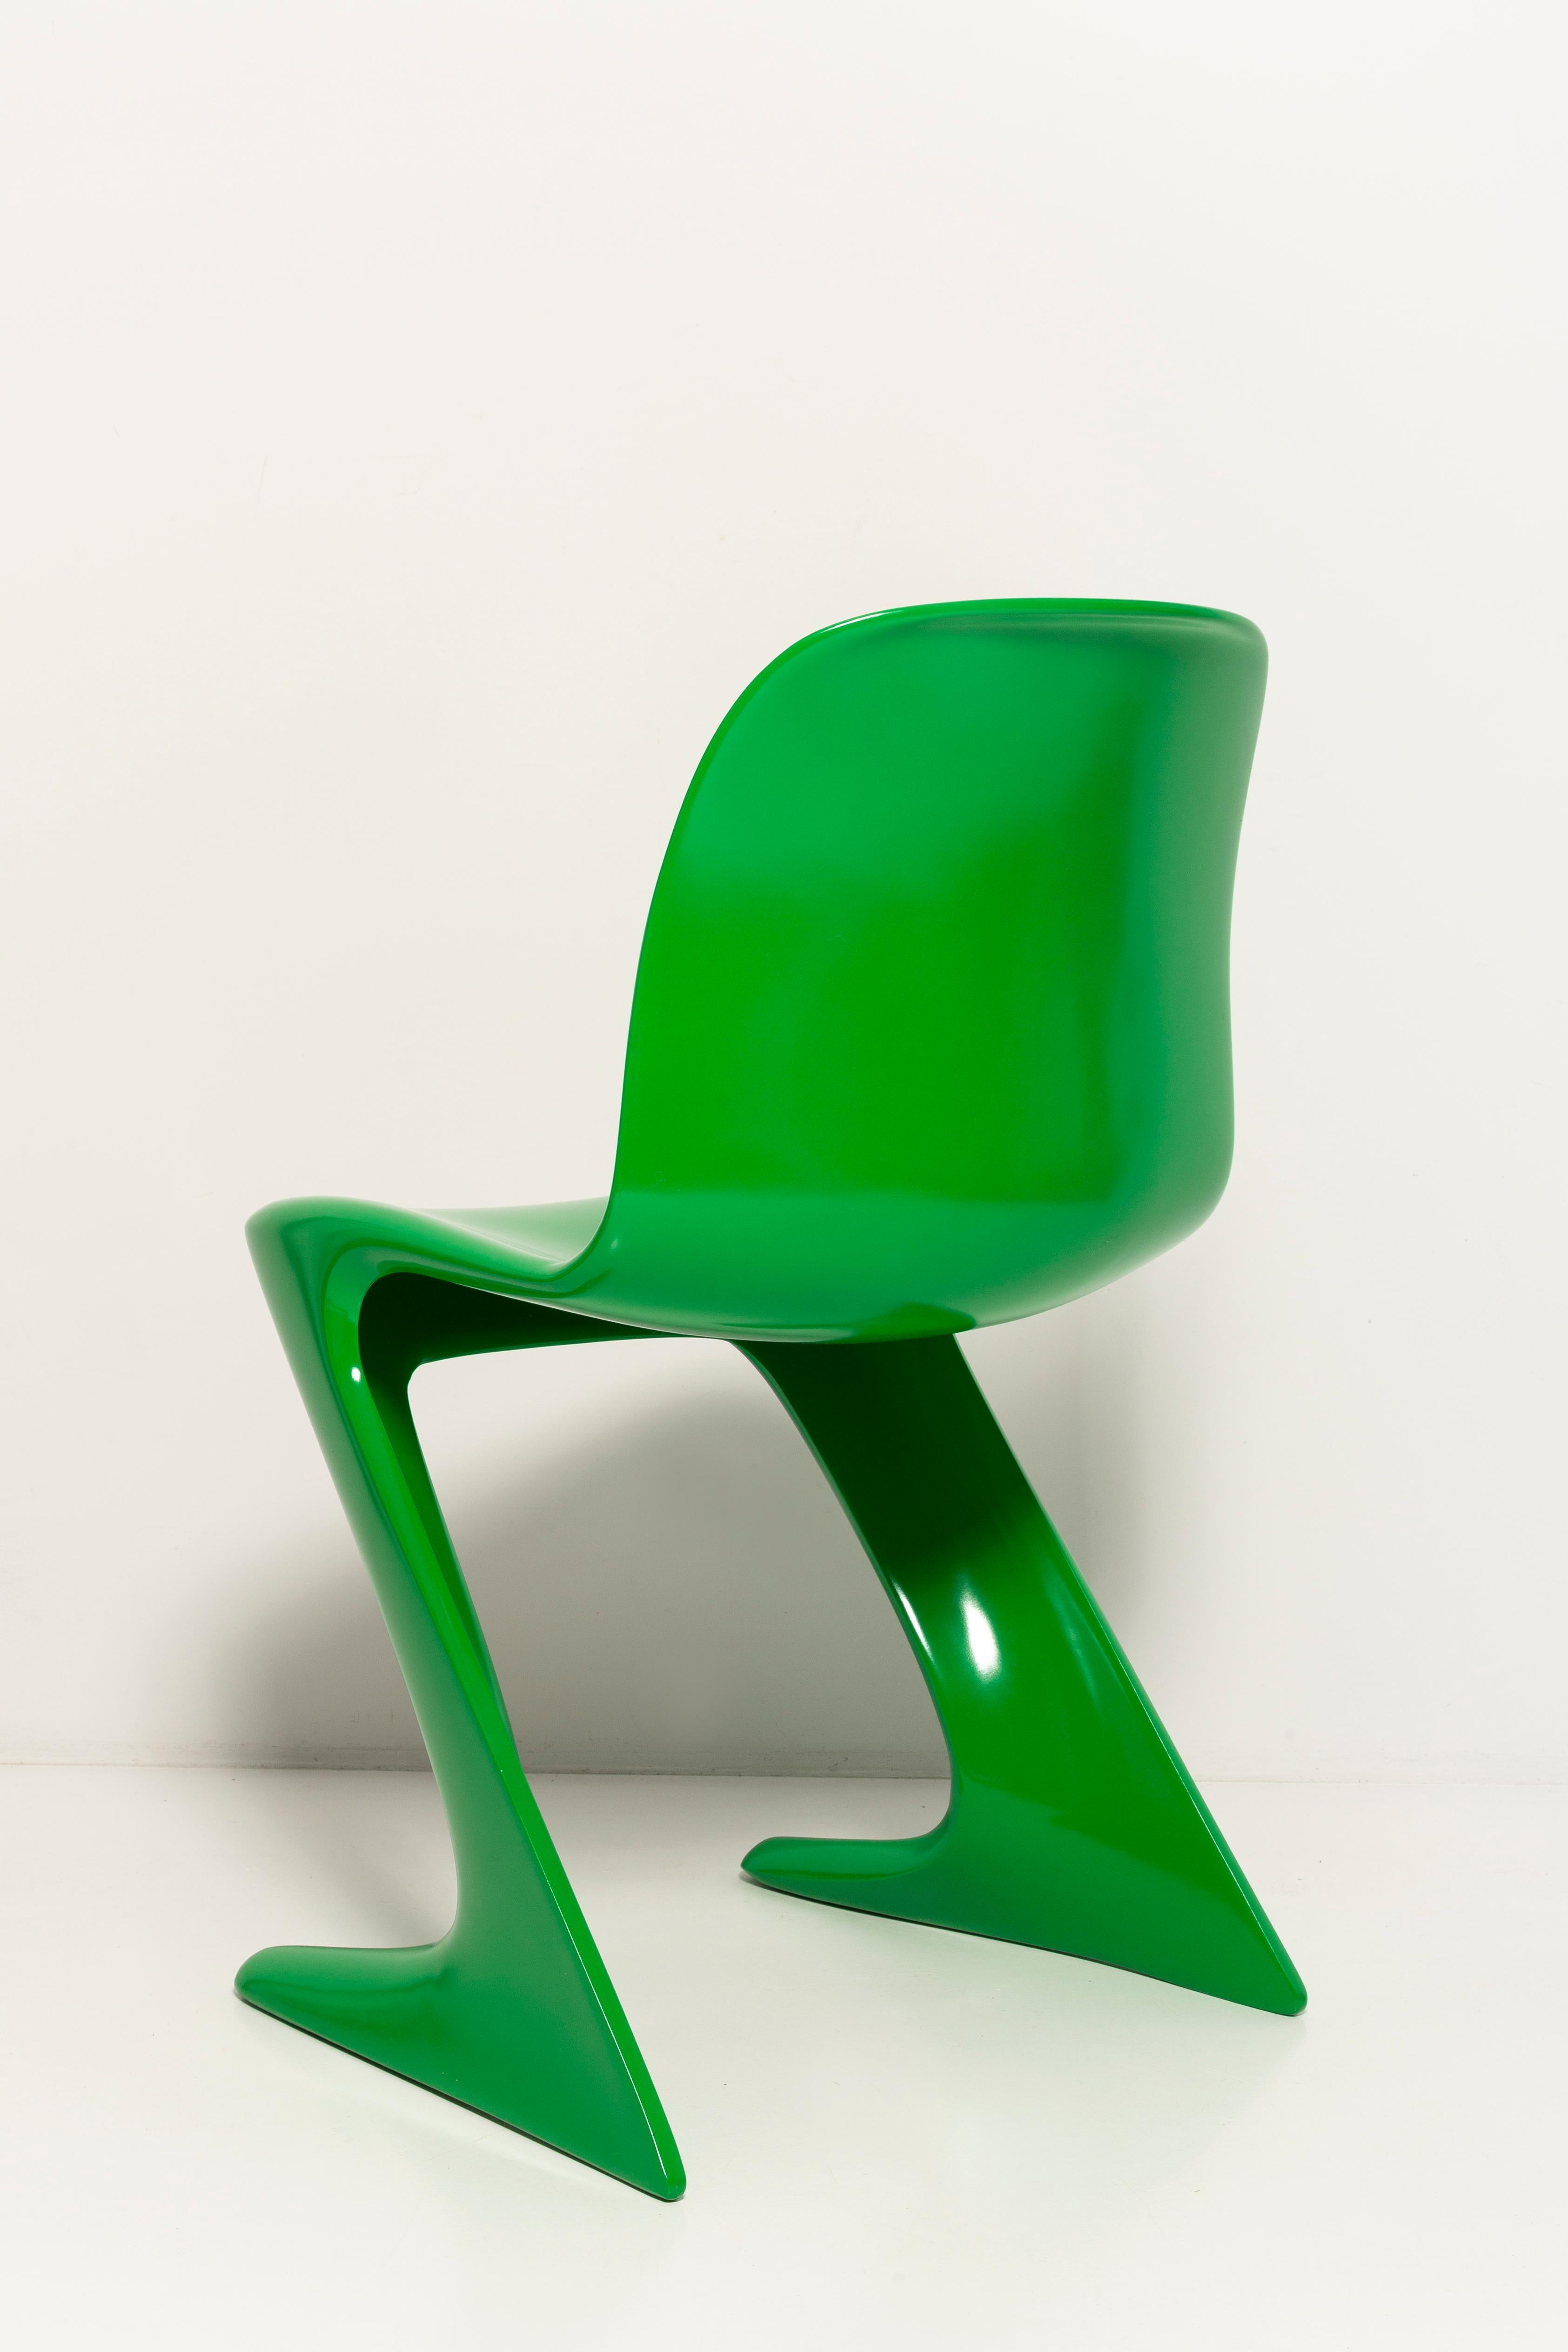 Set of Eight Green Kangaroo Chairs Designed by Ernst Moeckl, Germany, 1960s For Sale 1